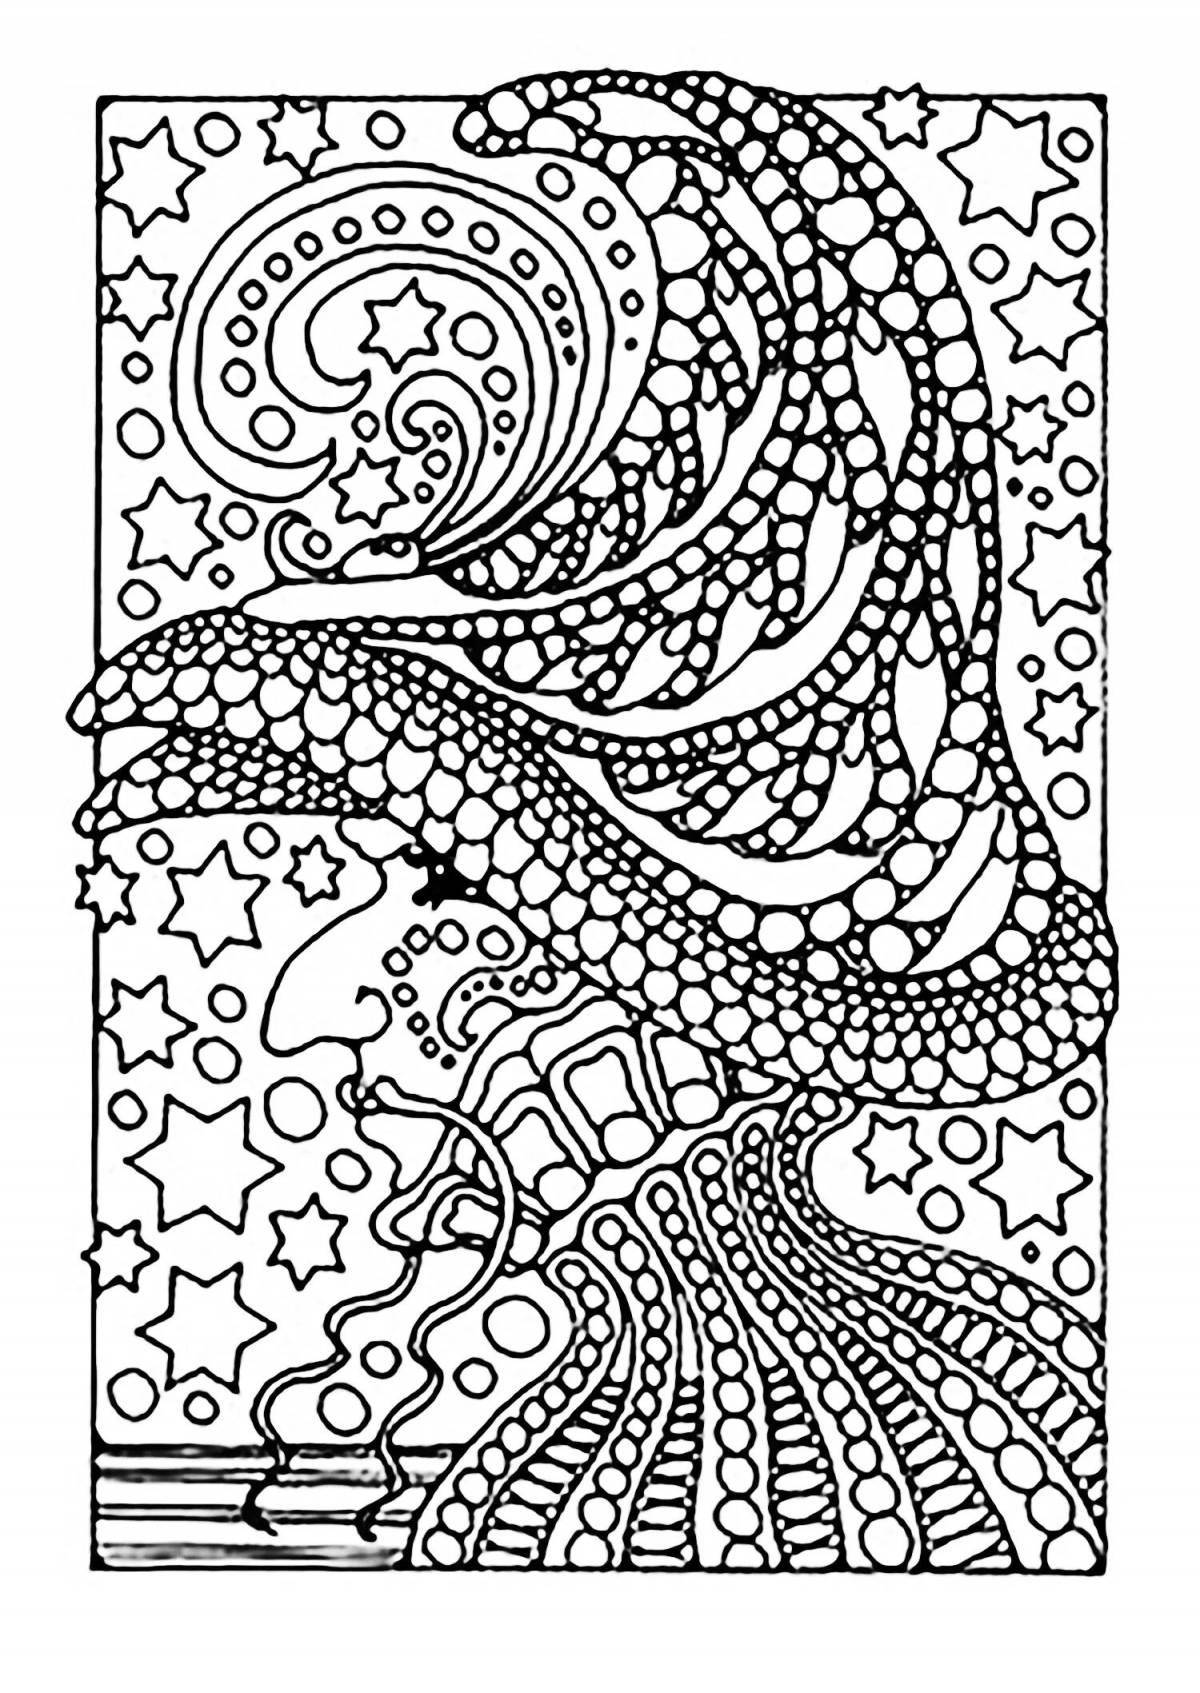 Radiant coloring page happy color for adults en